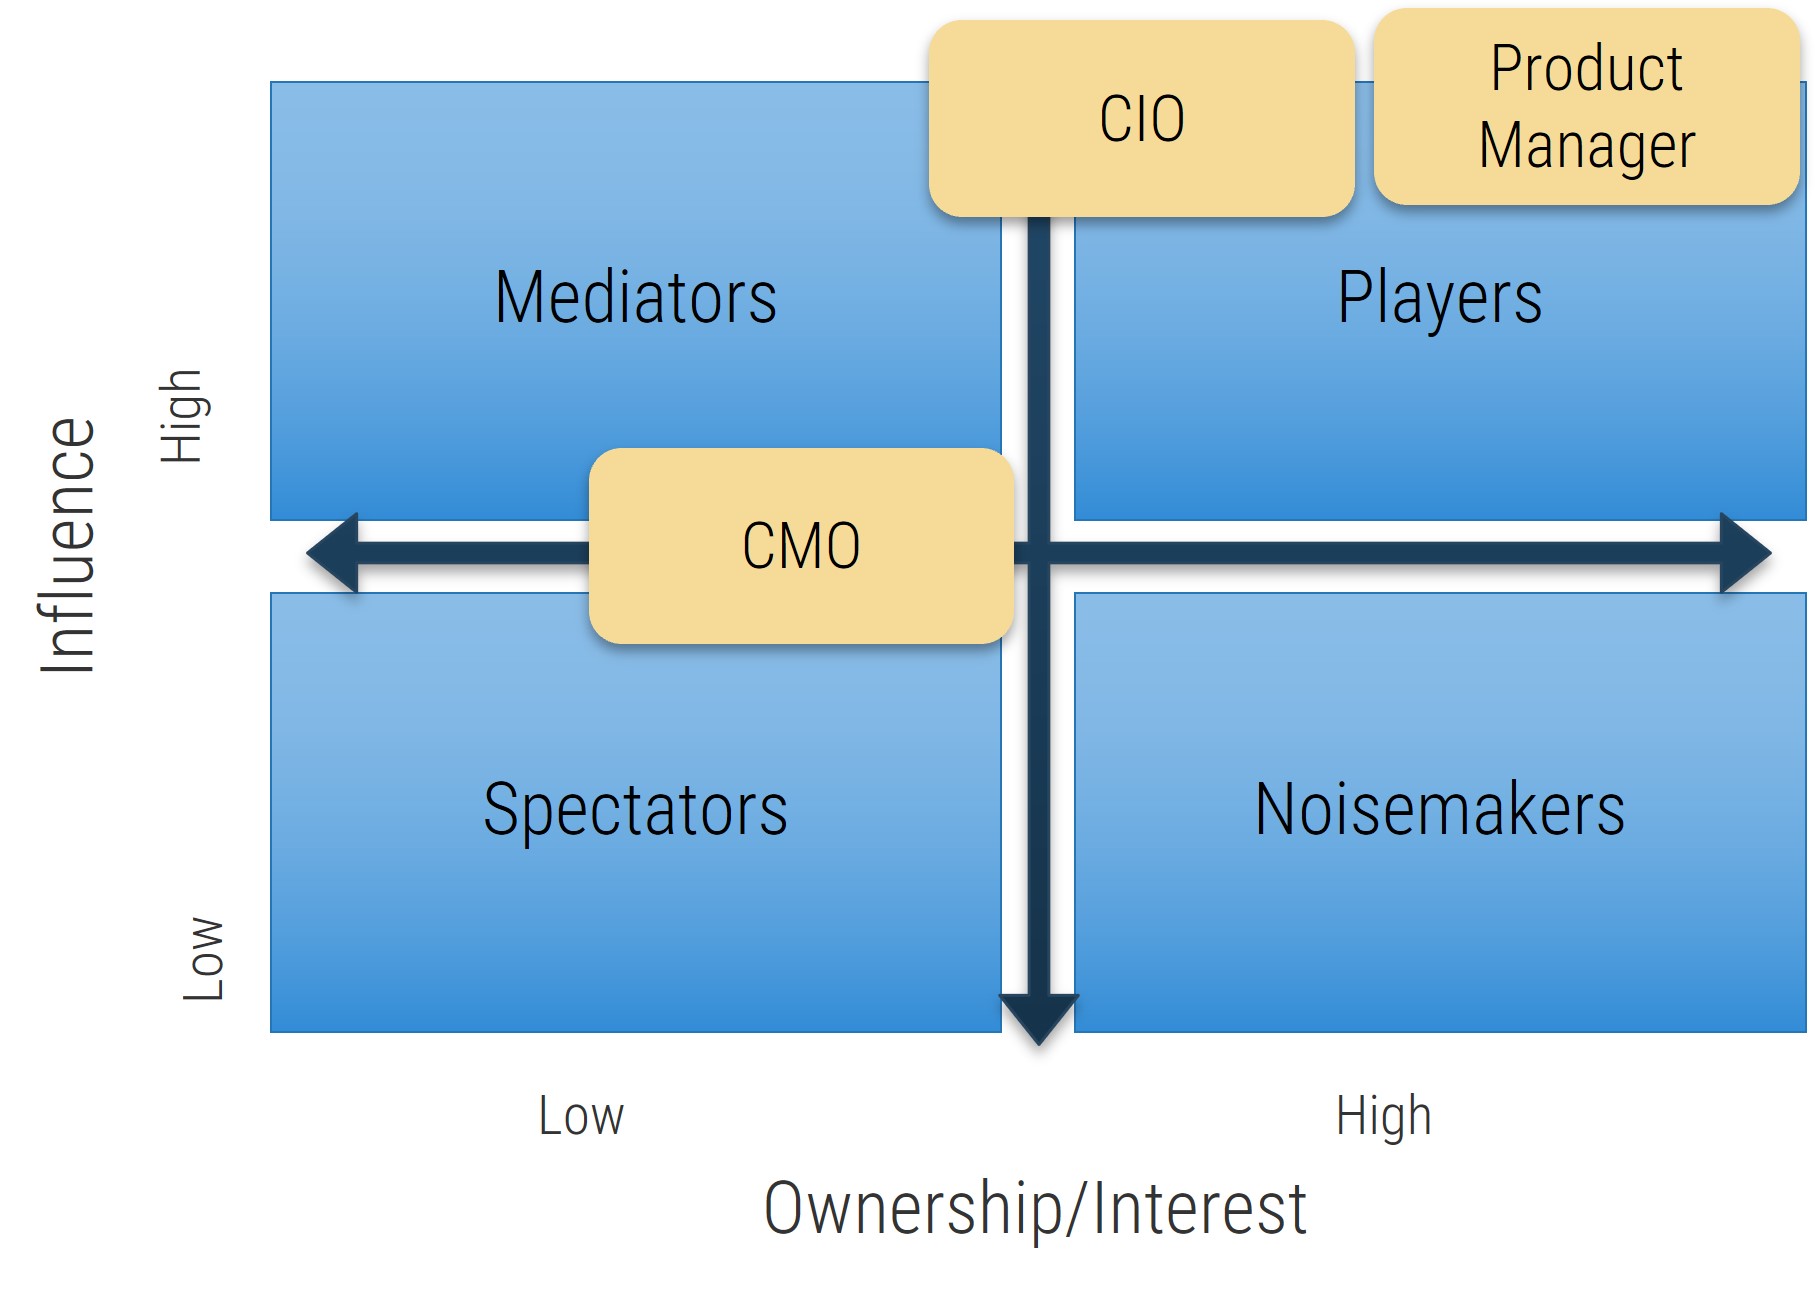 The example stakeholder prioritization map is shown with the stakeholders grouped into the categories.